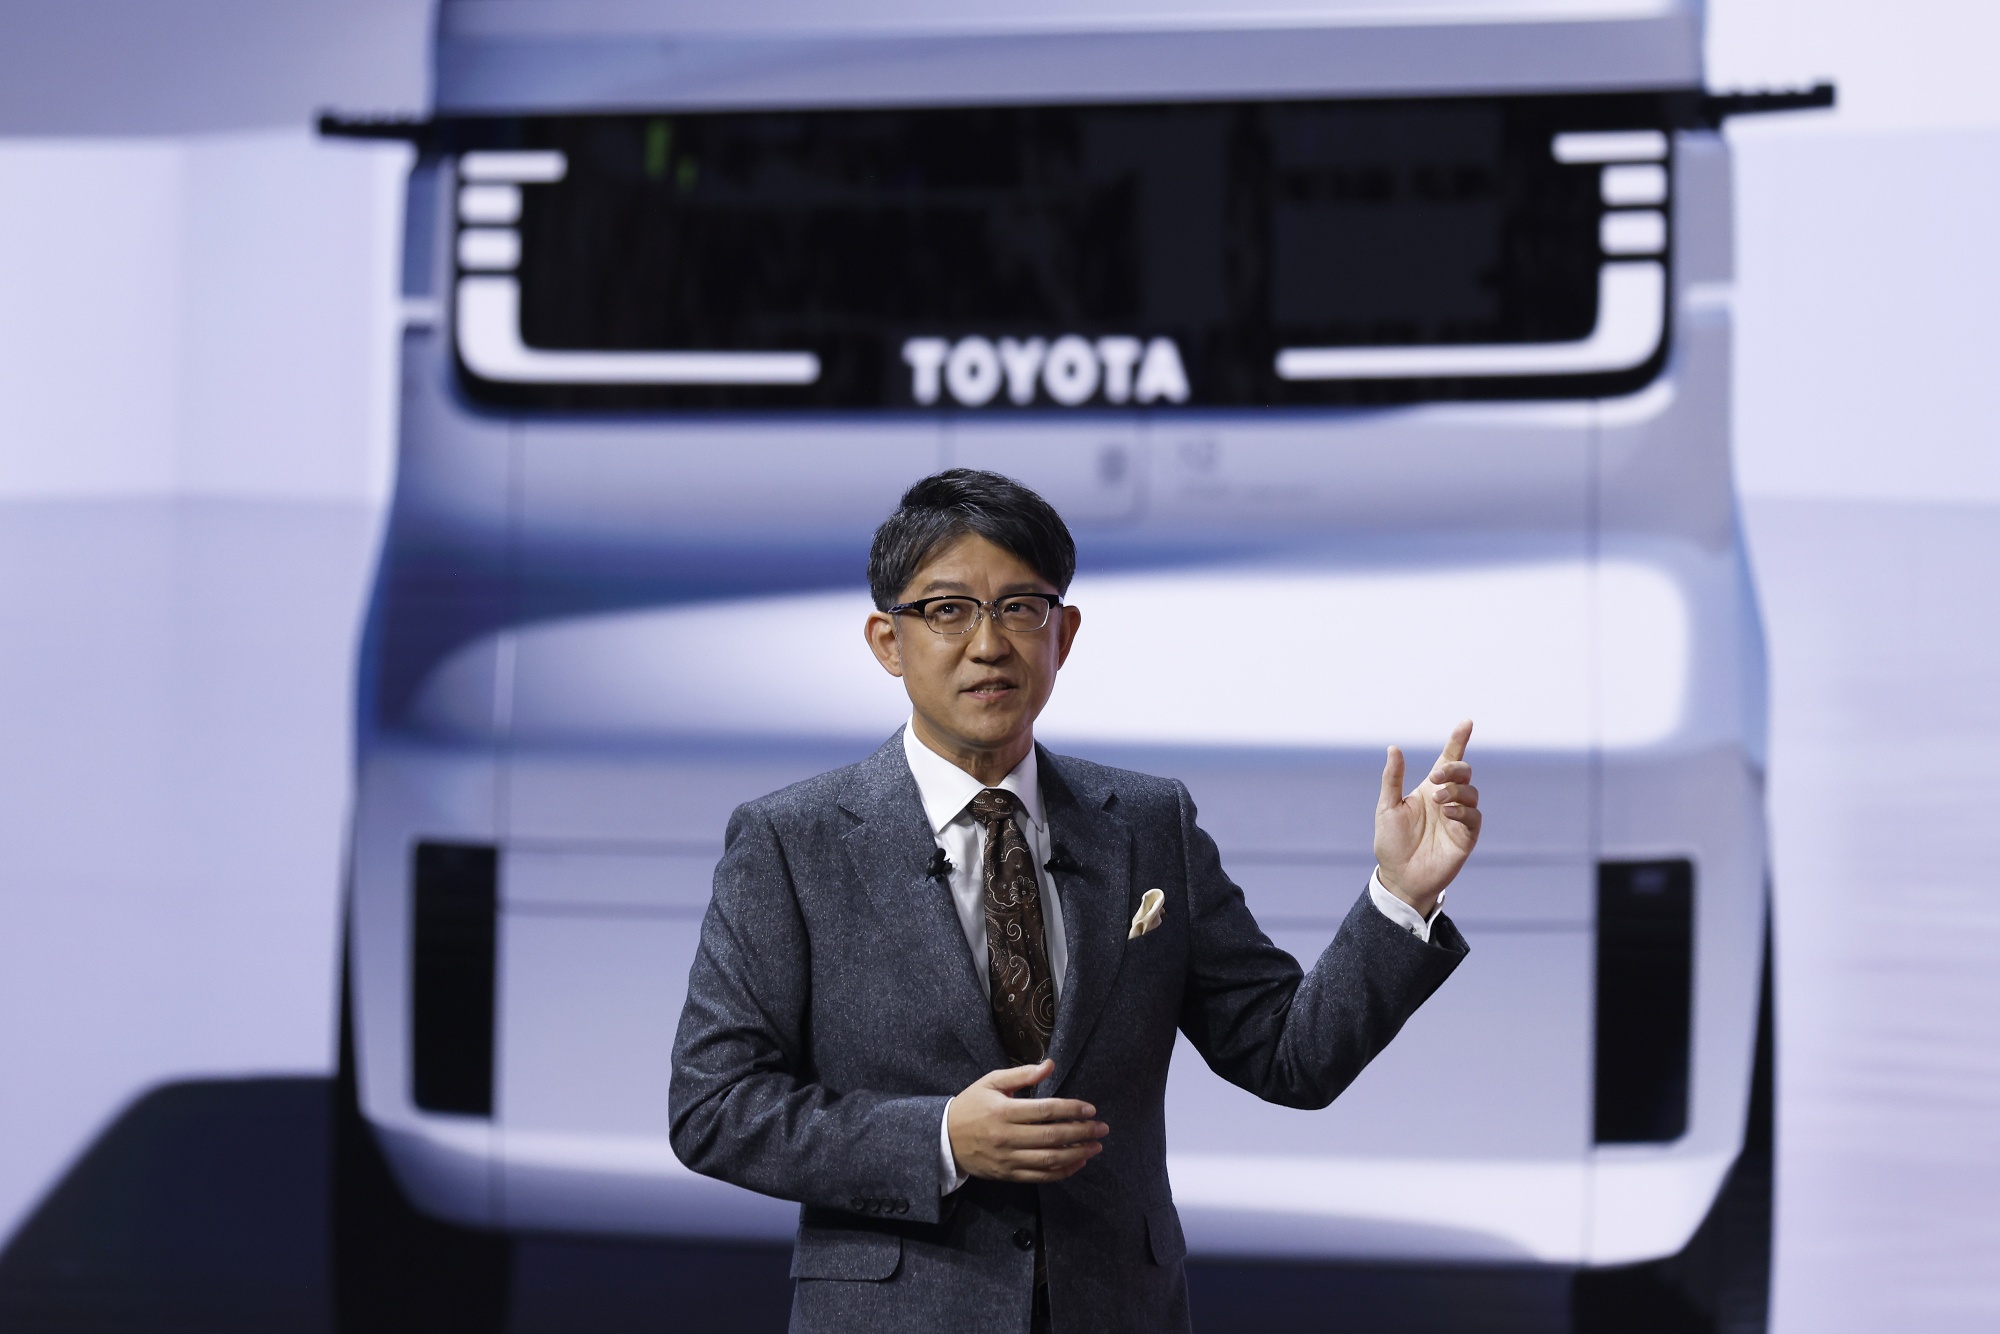 Toyota Chairman Says People Are Finally Seeing the Reality About EVs - WSJ